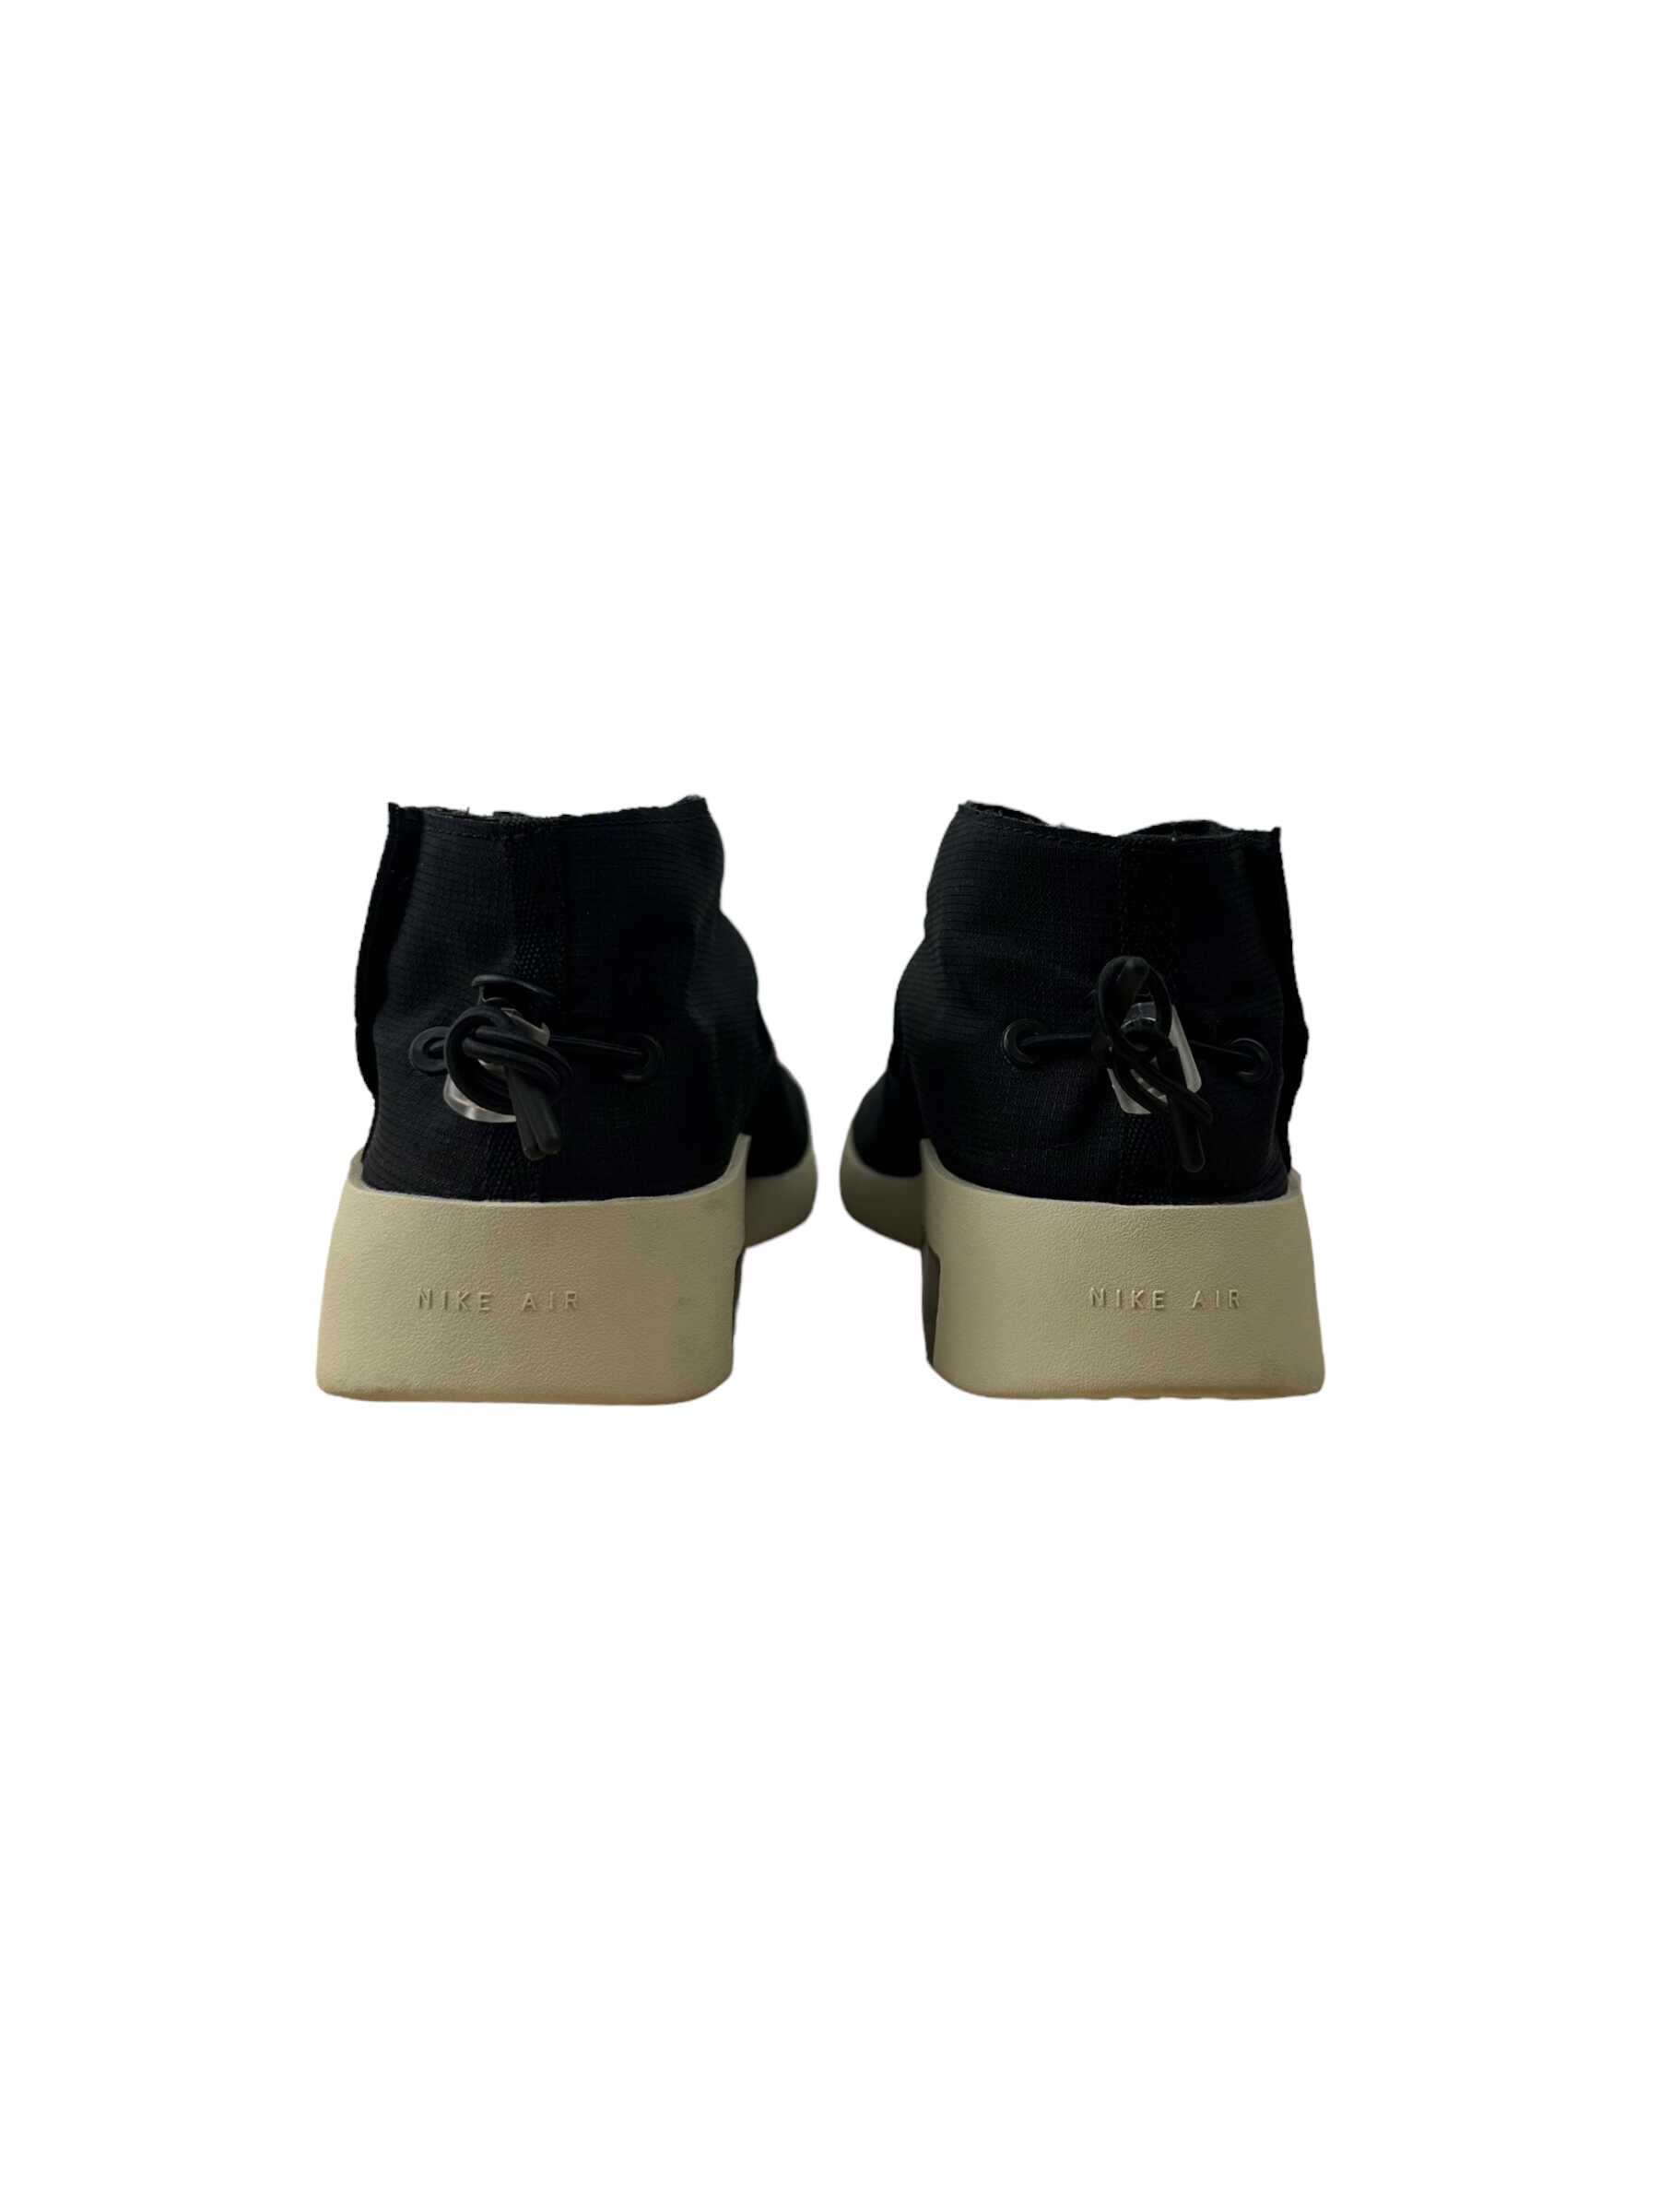 Nike Air Fear Of God Black Moccasin Sneakers - Genuine Design Luxury Consignment for Men. New & Pre-Owned Clothing, Shoes, & Accessories. Calgary, Canada